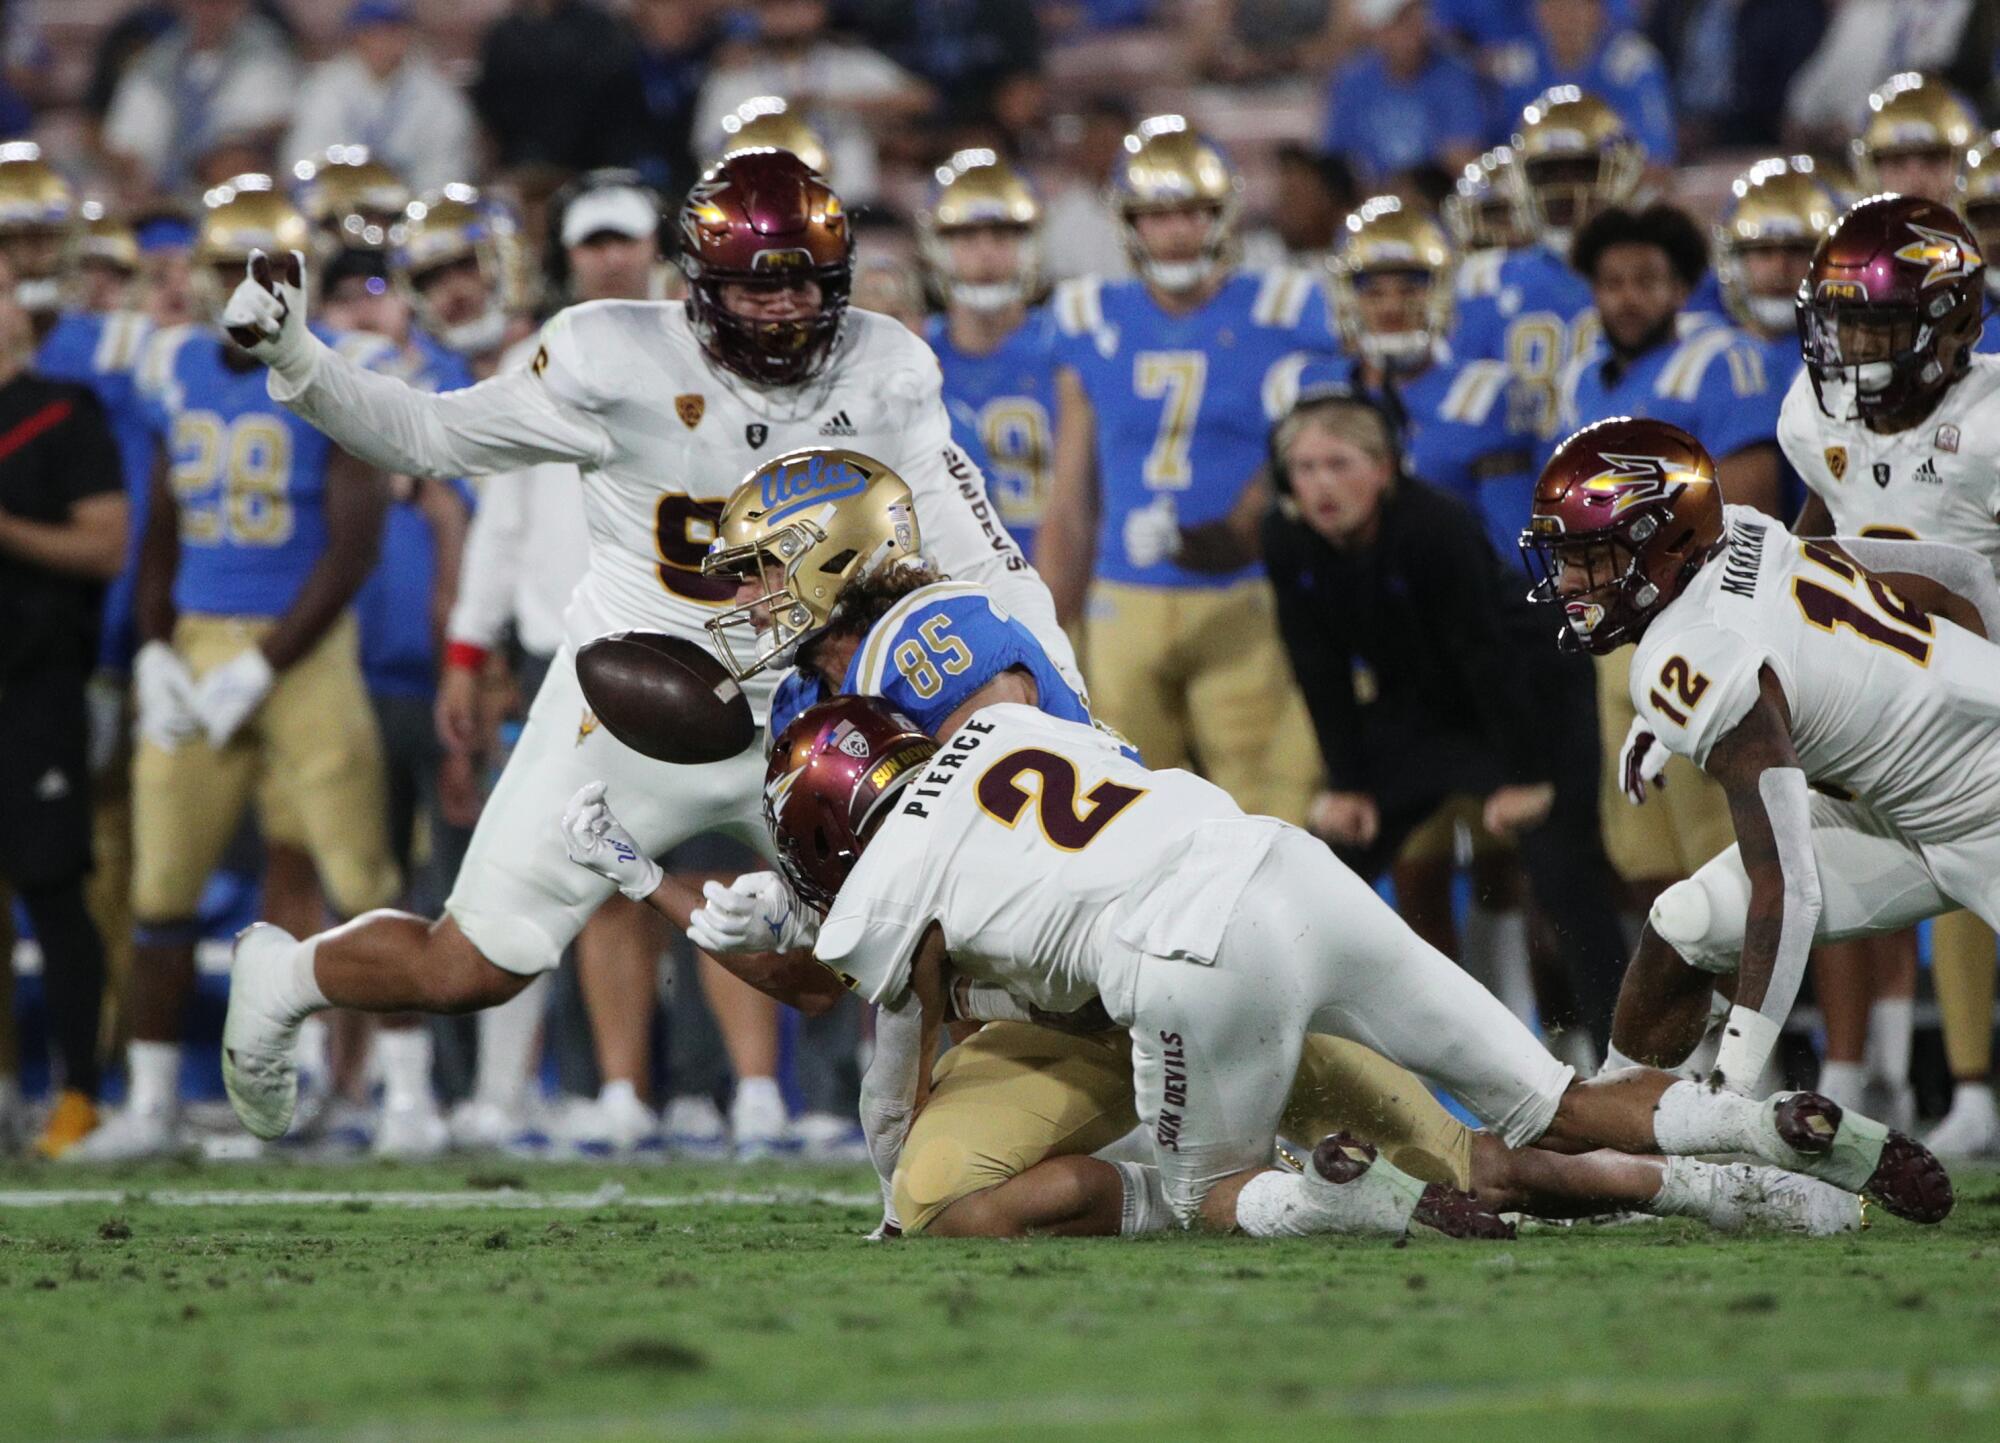 UCLA tight end Greg Dulcich can't make a catch as he's hit by Arizona State defensive back DeAndre Pierce.